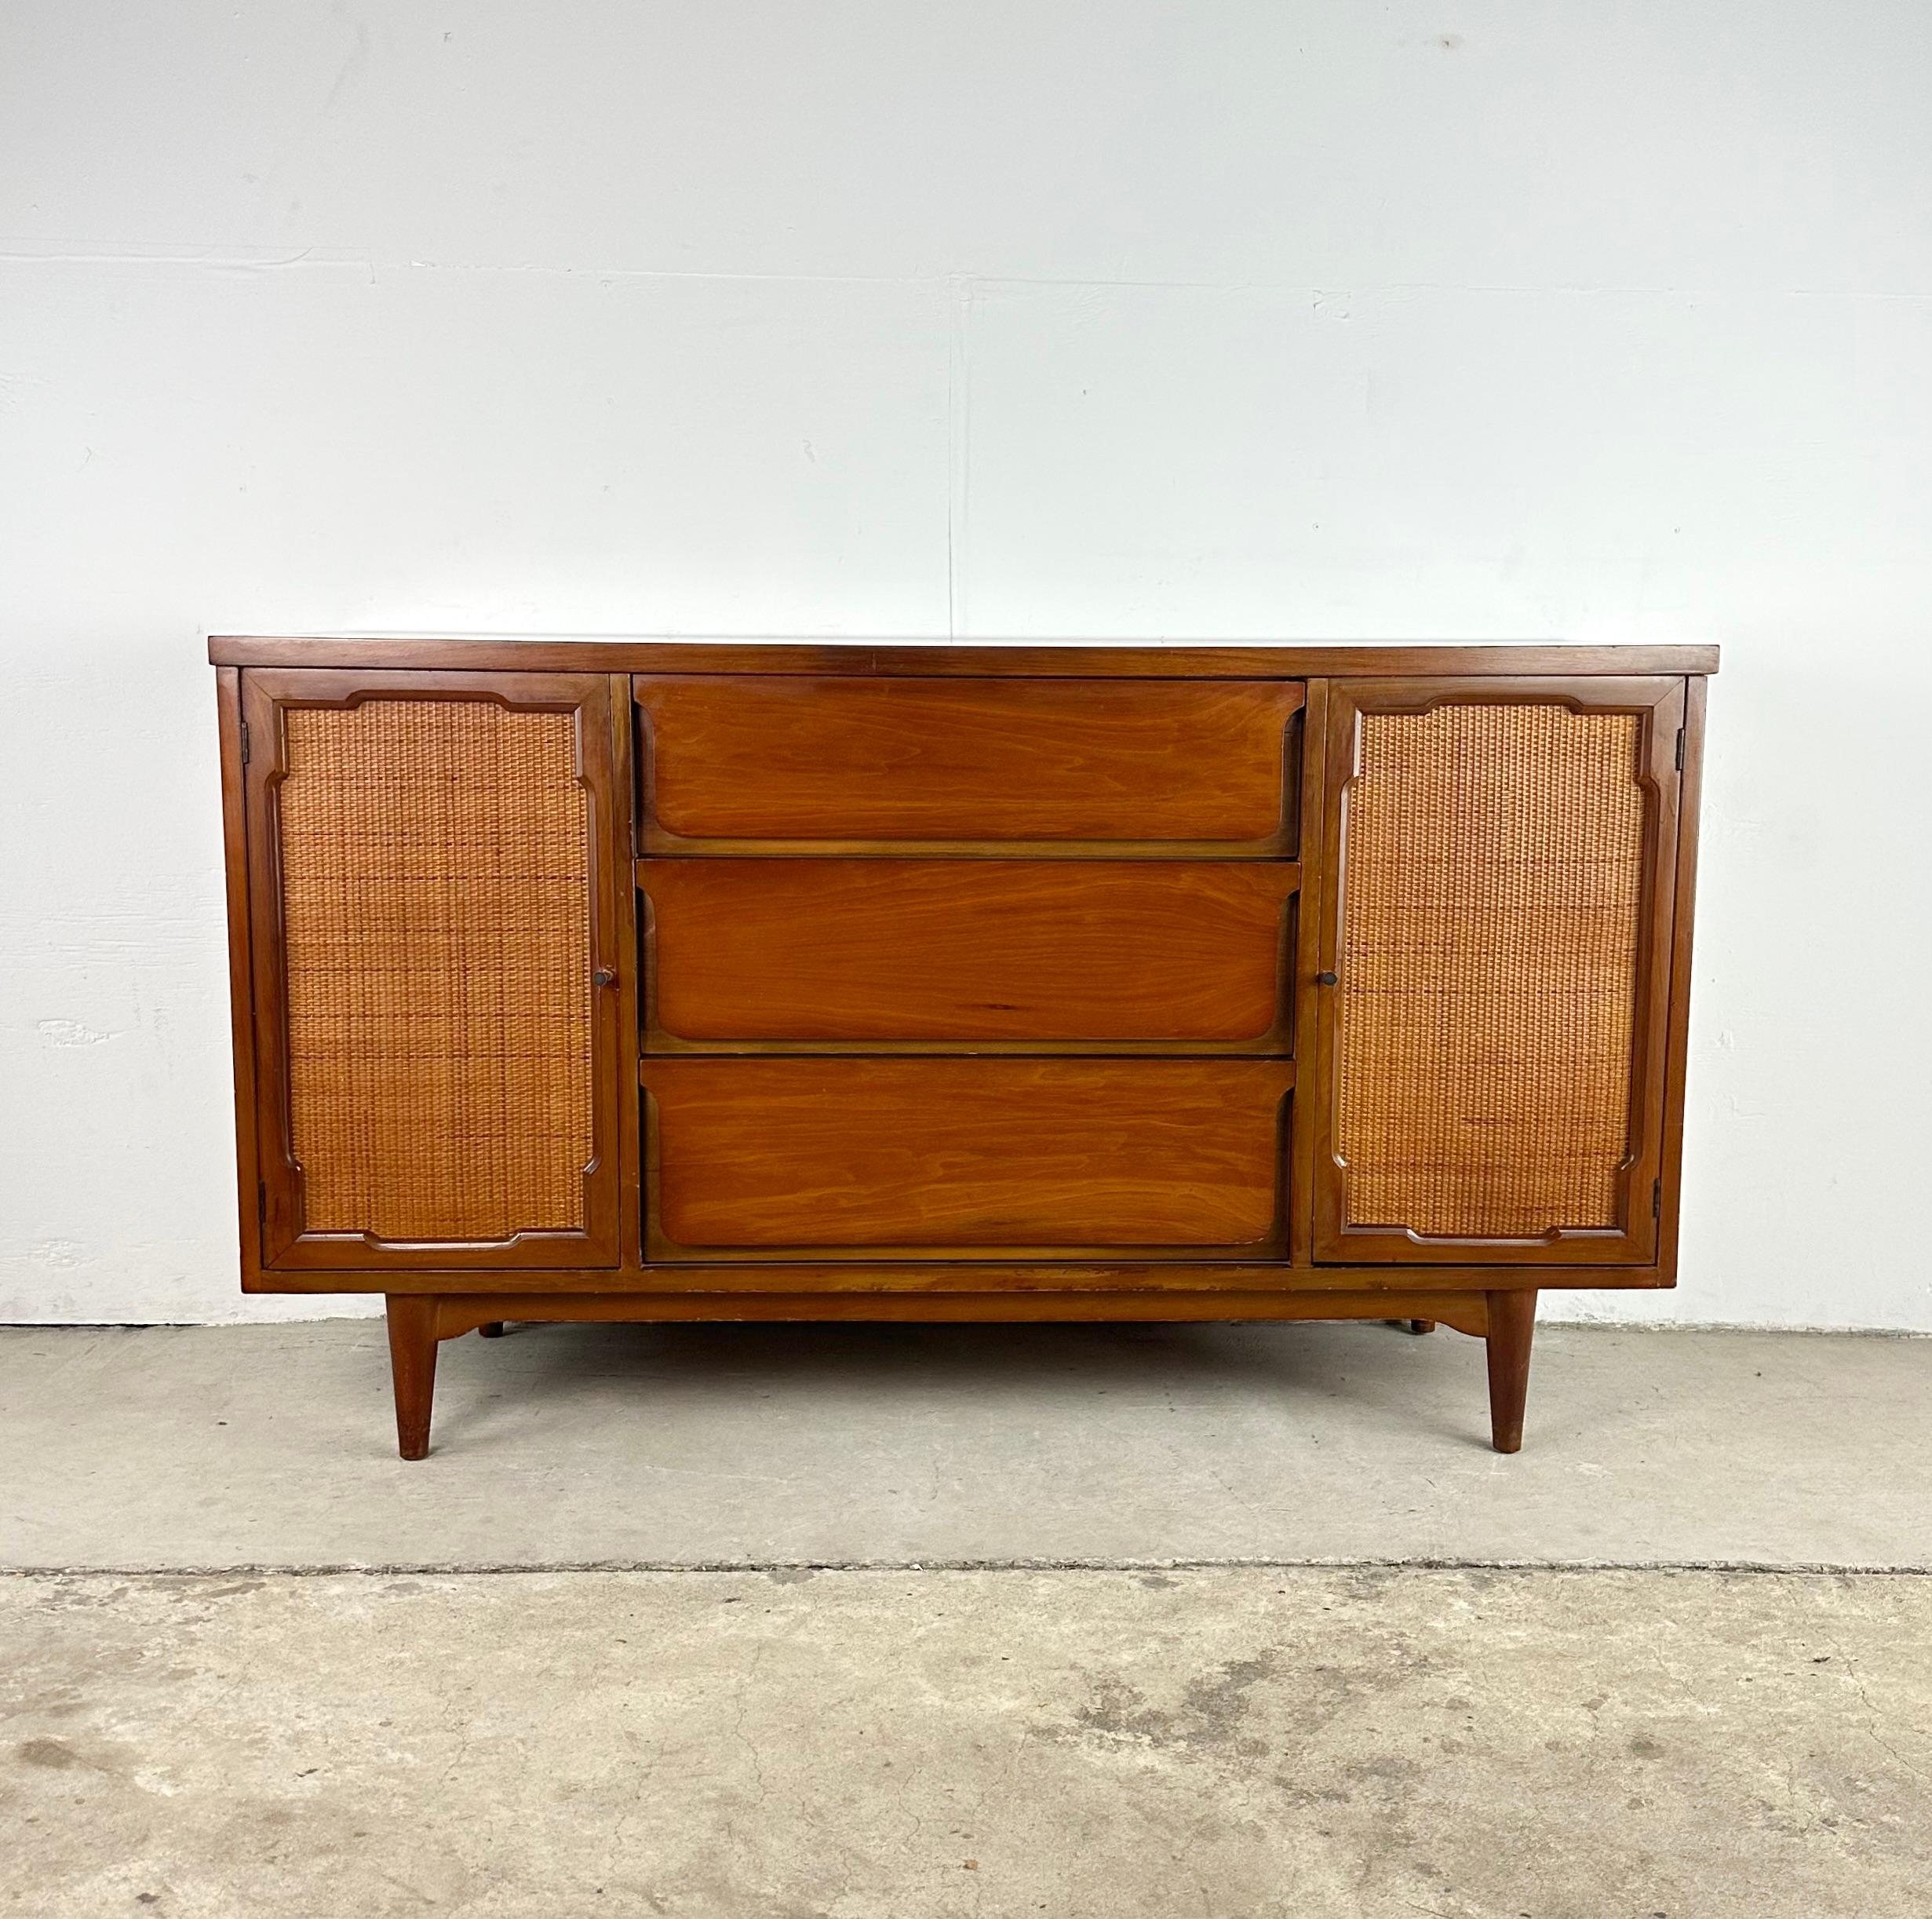 Uncover a blend of functionality and mid-century style with this simple yet striking vintage sideboard. This server boasts clean lines and organic tones- cane doors not only add warmth but also a touch of texture to your space.

The marriage of wood